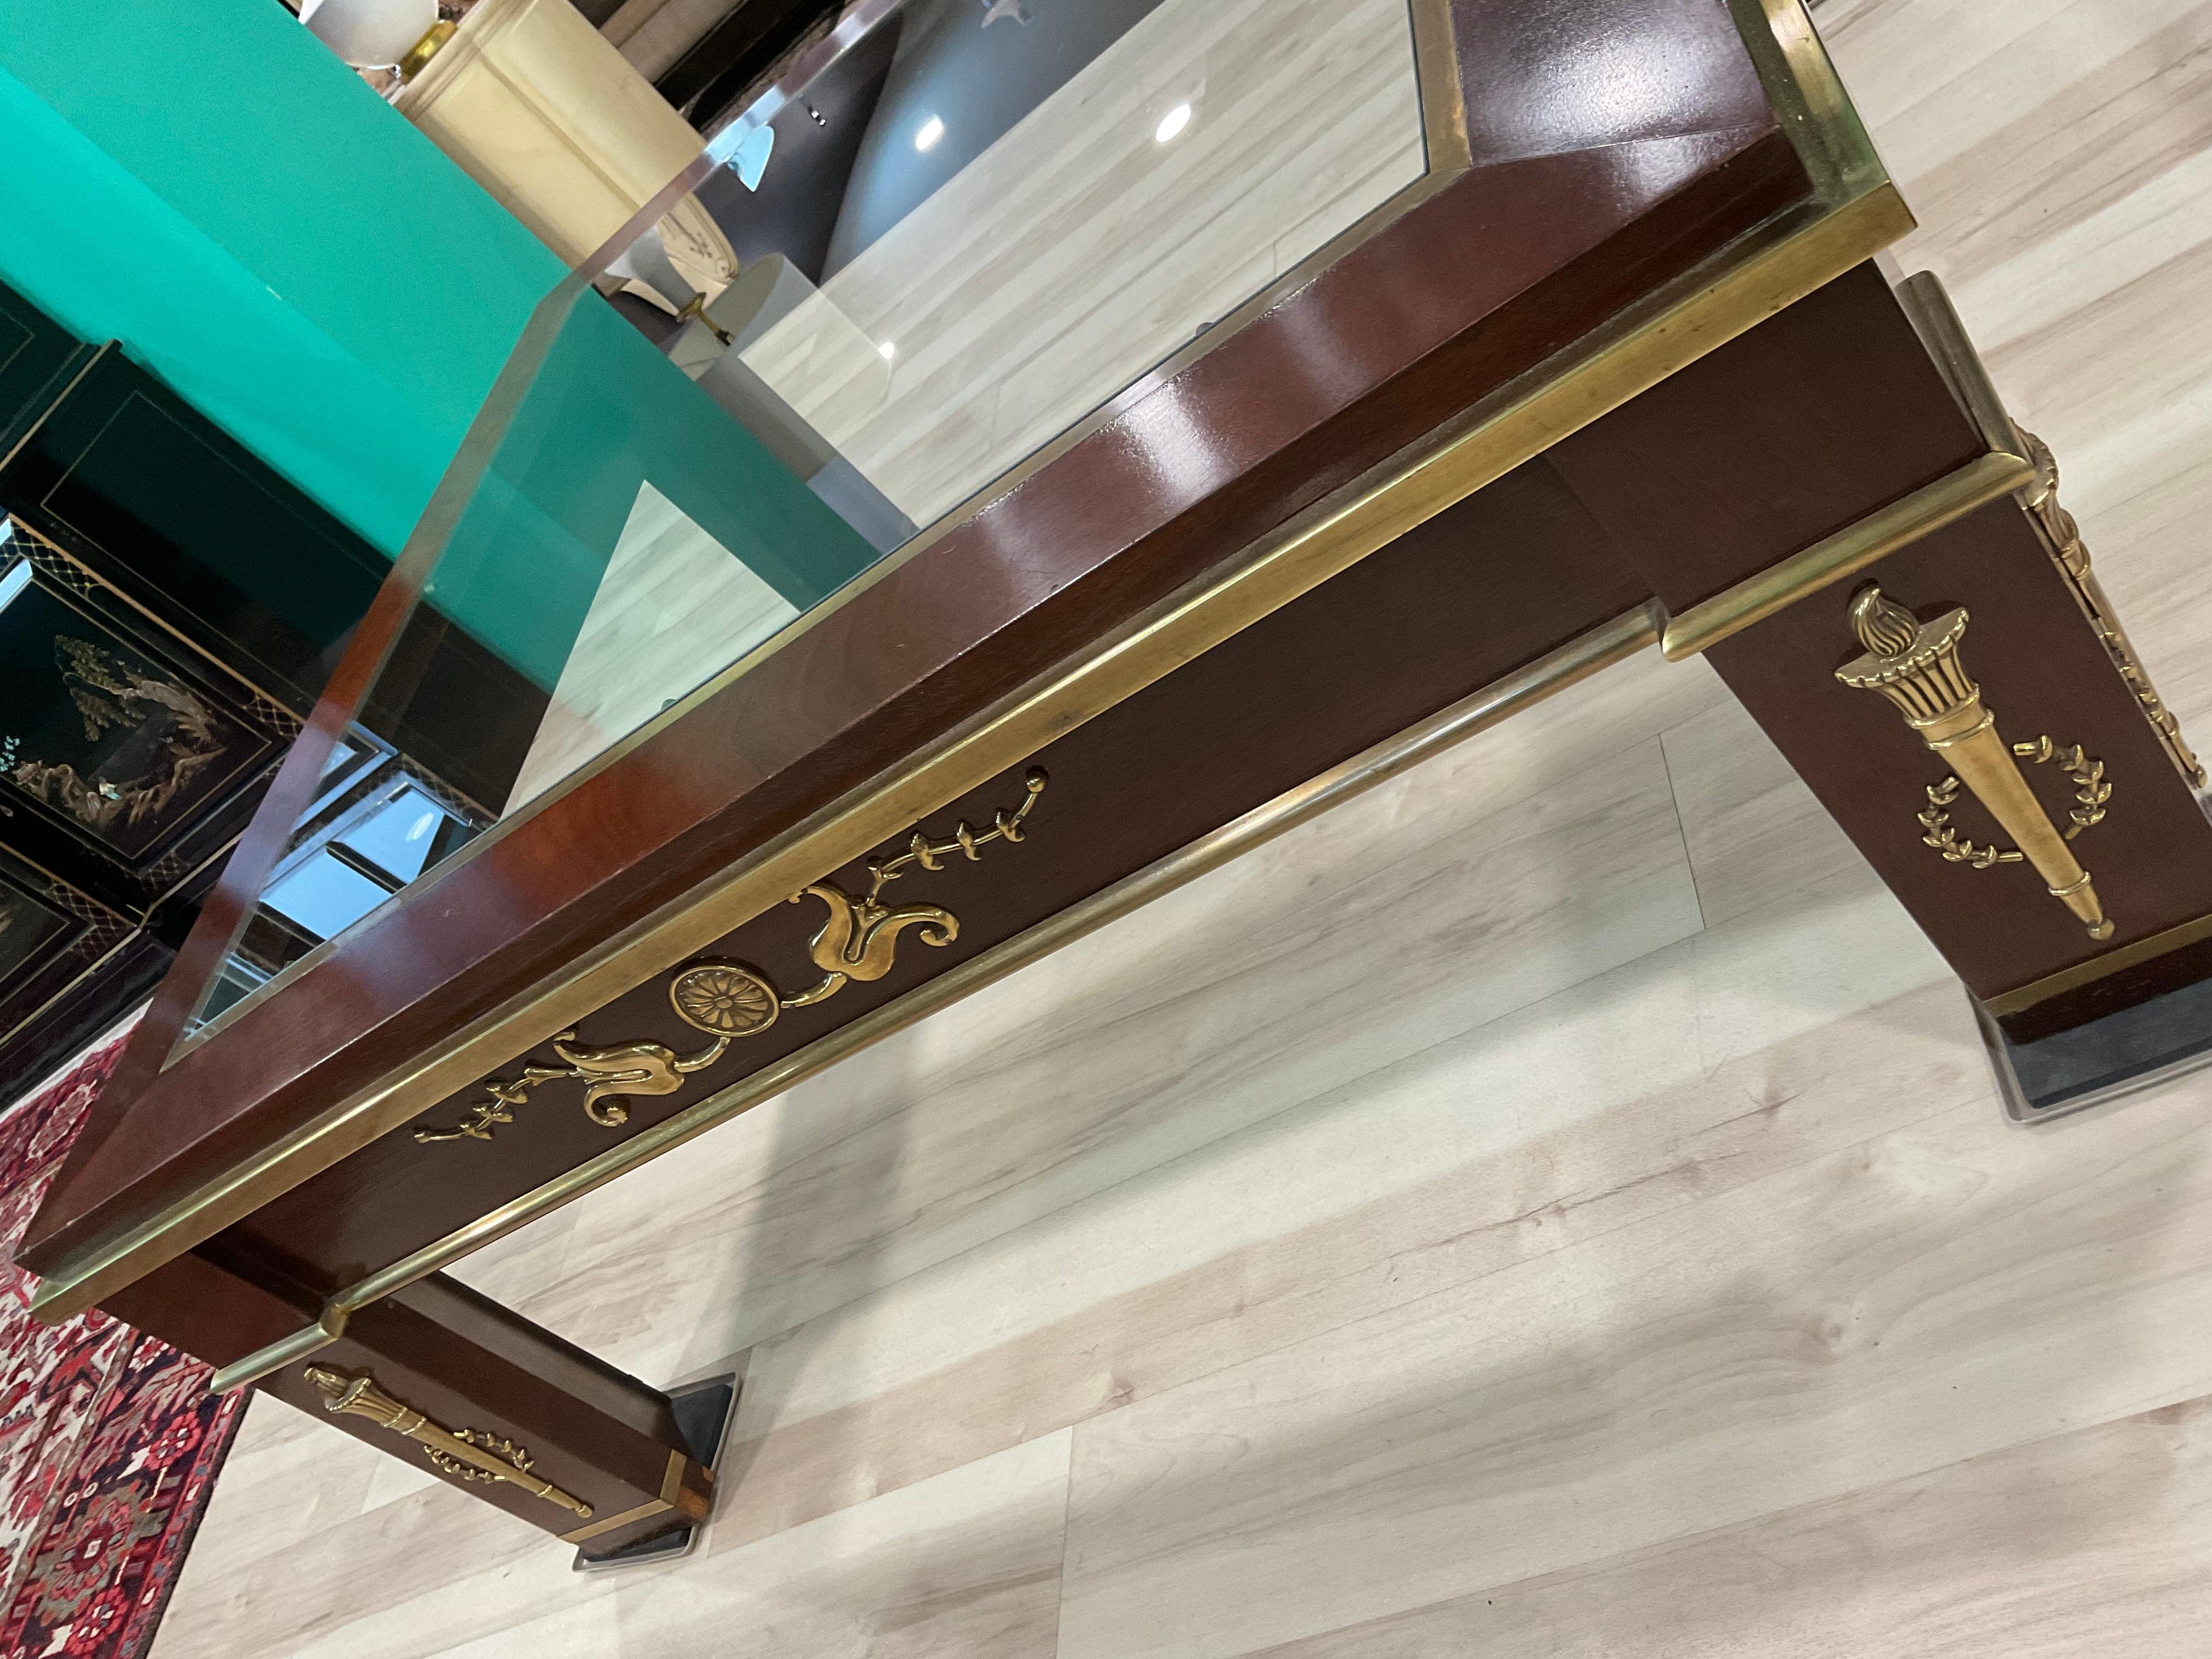 Gorgeous Brass Embellished neoclassical Coffee Table from Mastercraft. Incredible brass appliqué and trim detailing. Glass top. Beautiful piece.

Condition Disclosure:
Please understand nearly all of our inventory is comprised of rare to very rare